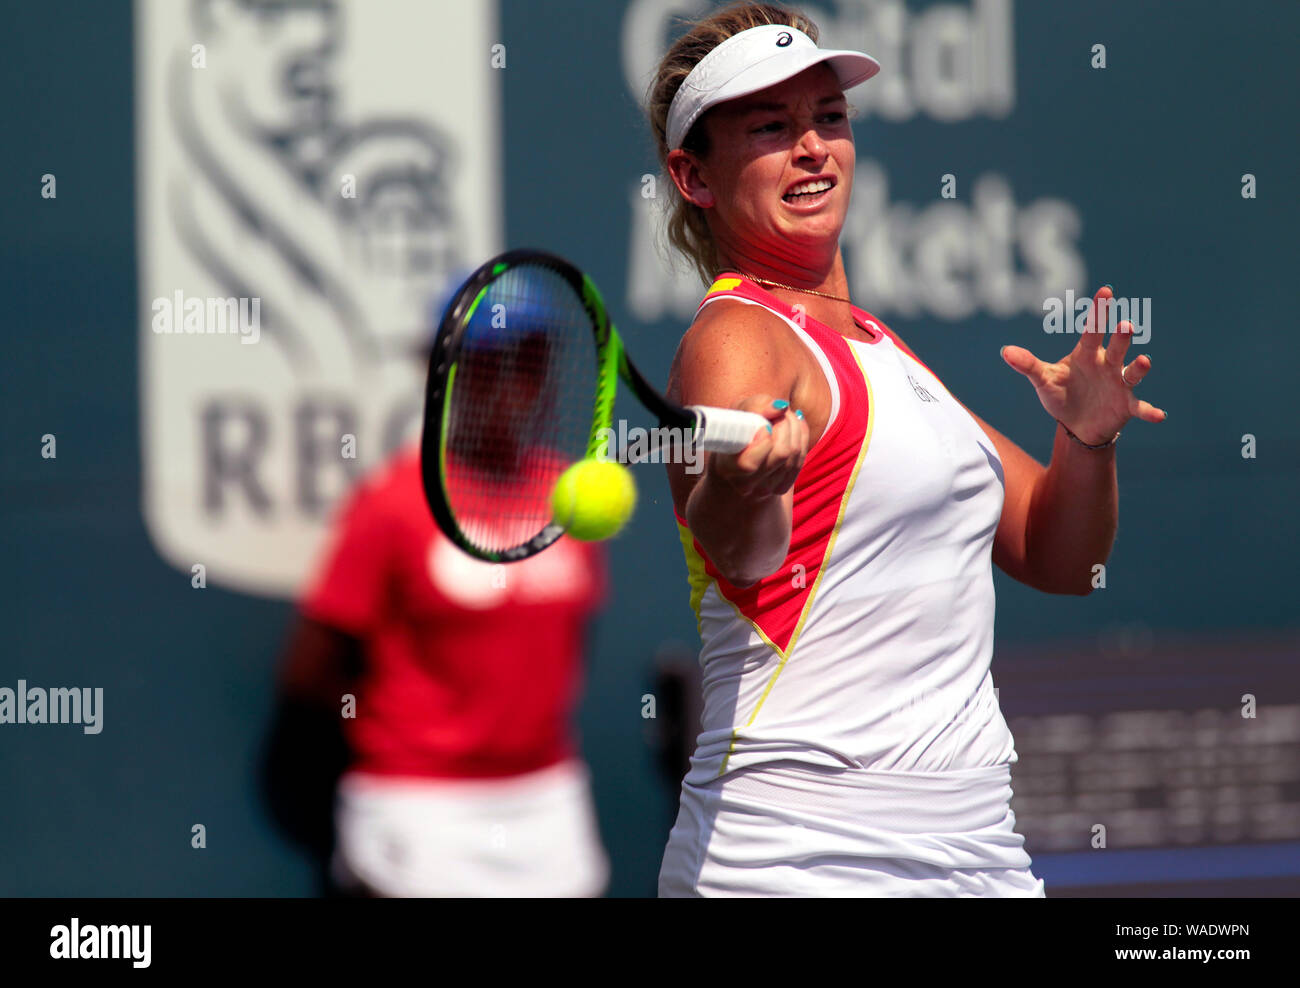 Crotona Park, Bronx, New York -- Coco Vandeweghe of the, United States. 19th Aug, 2019. in action against Anna Blinkova of Russia during the opening day of play at the NYJTL Bronx Open at the Cary Leeds Tennis Center, in Crotona Park in New York's Bronx. Vandeweghe lost the match 6-3, 6-0. The tournament which is free to the public is the first professional tournament in the Bronx since 2012. Credit: Adam Stoltman/Alamy Live News Stock Photo